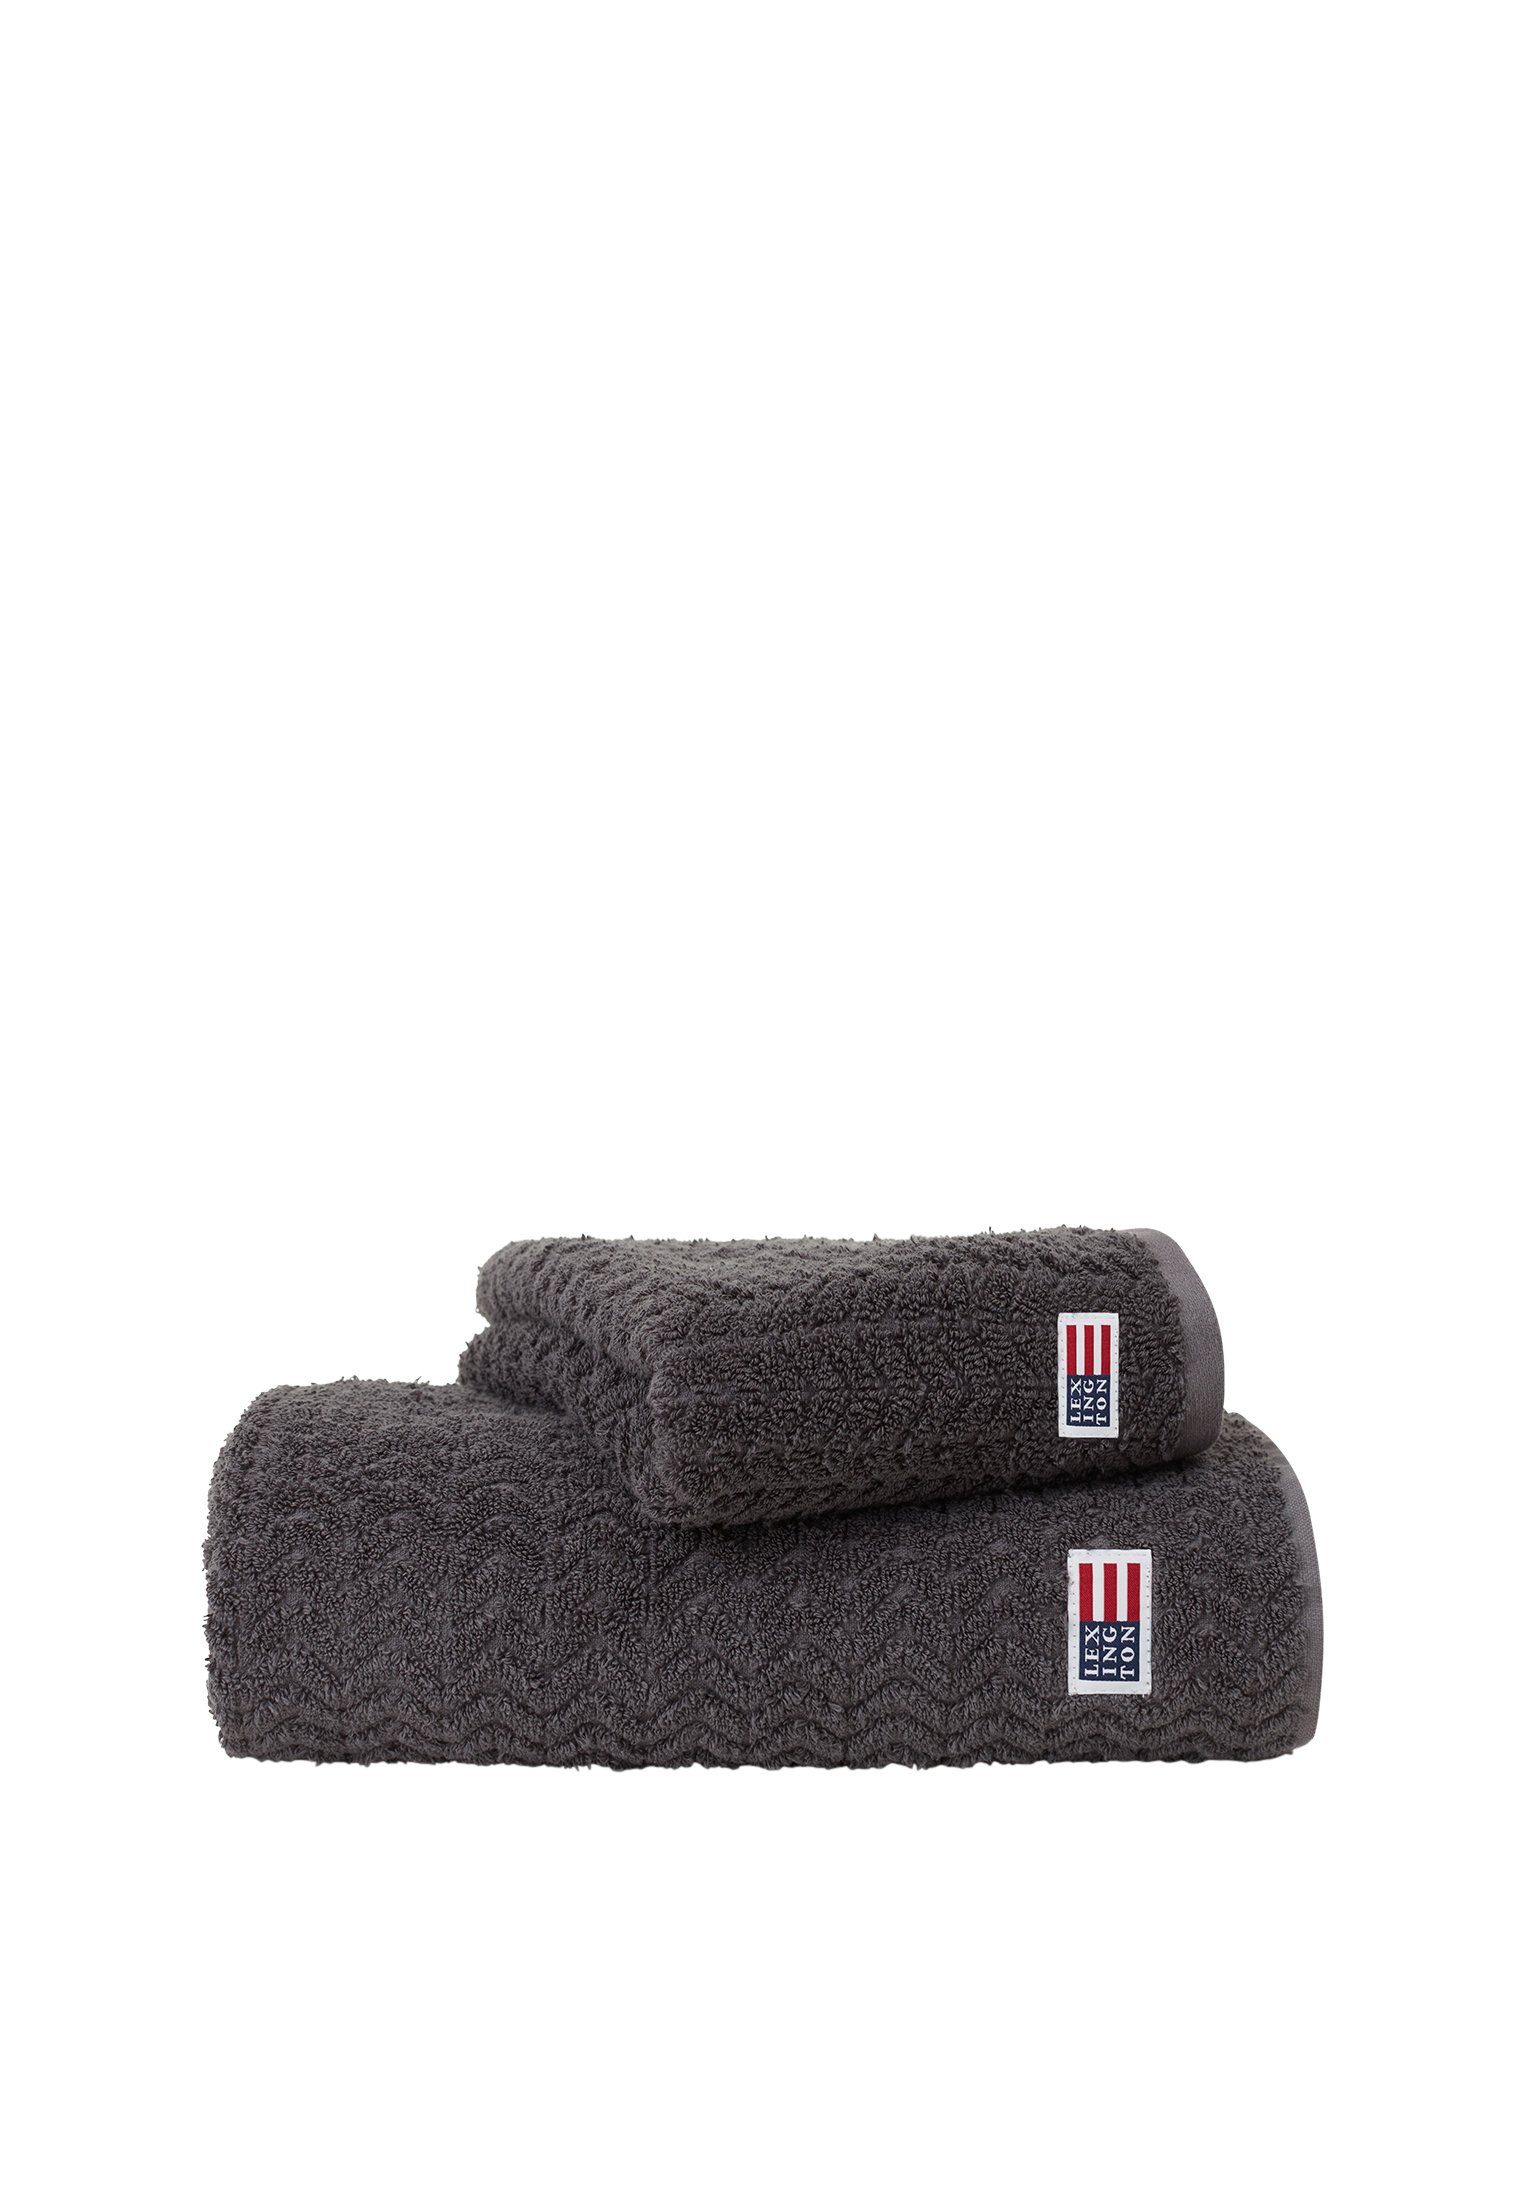 Lexington Handtuch Cotton/Lyocell Structured Terry Towel charcoal